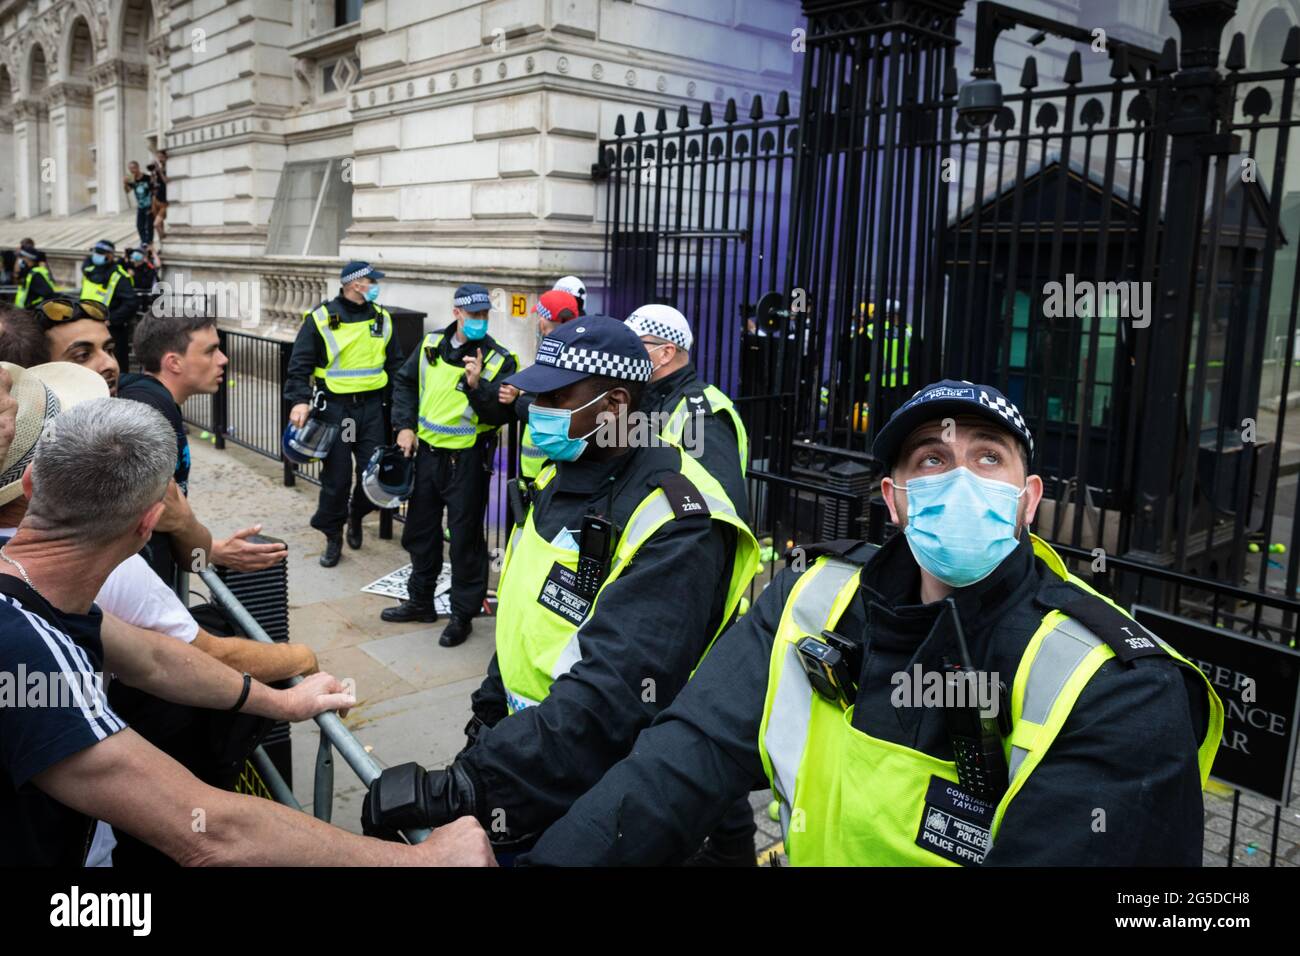 London, UK. 26th June, 2021. The police stand guard while protesters from an anti-lockdown demonstration throw tennis balls and smoke grenades into Downing street. Thousands of people marched to raise their concerns regarding government legislation centred around vaccinations and freedom to travel. Credit: Andy Barton/Alamy Live News Stock Photo